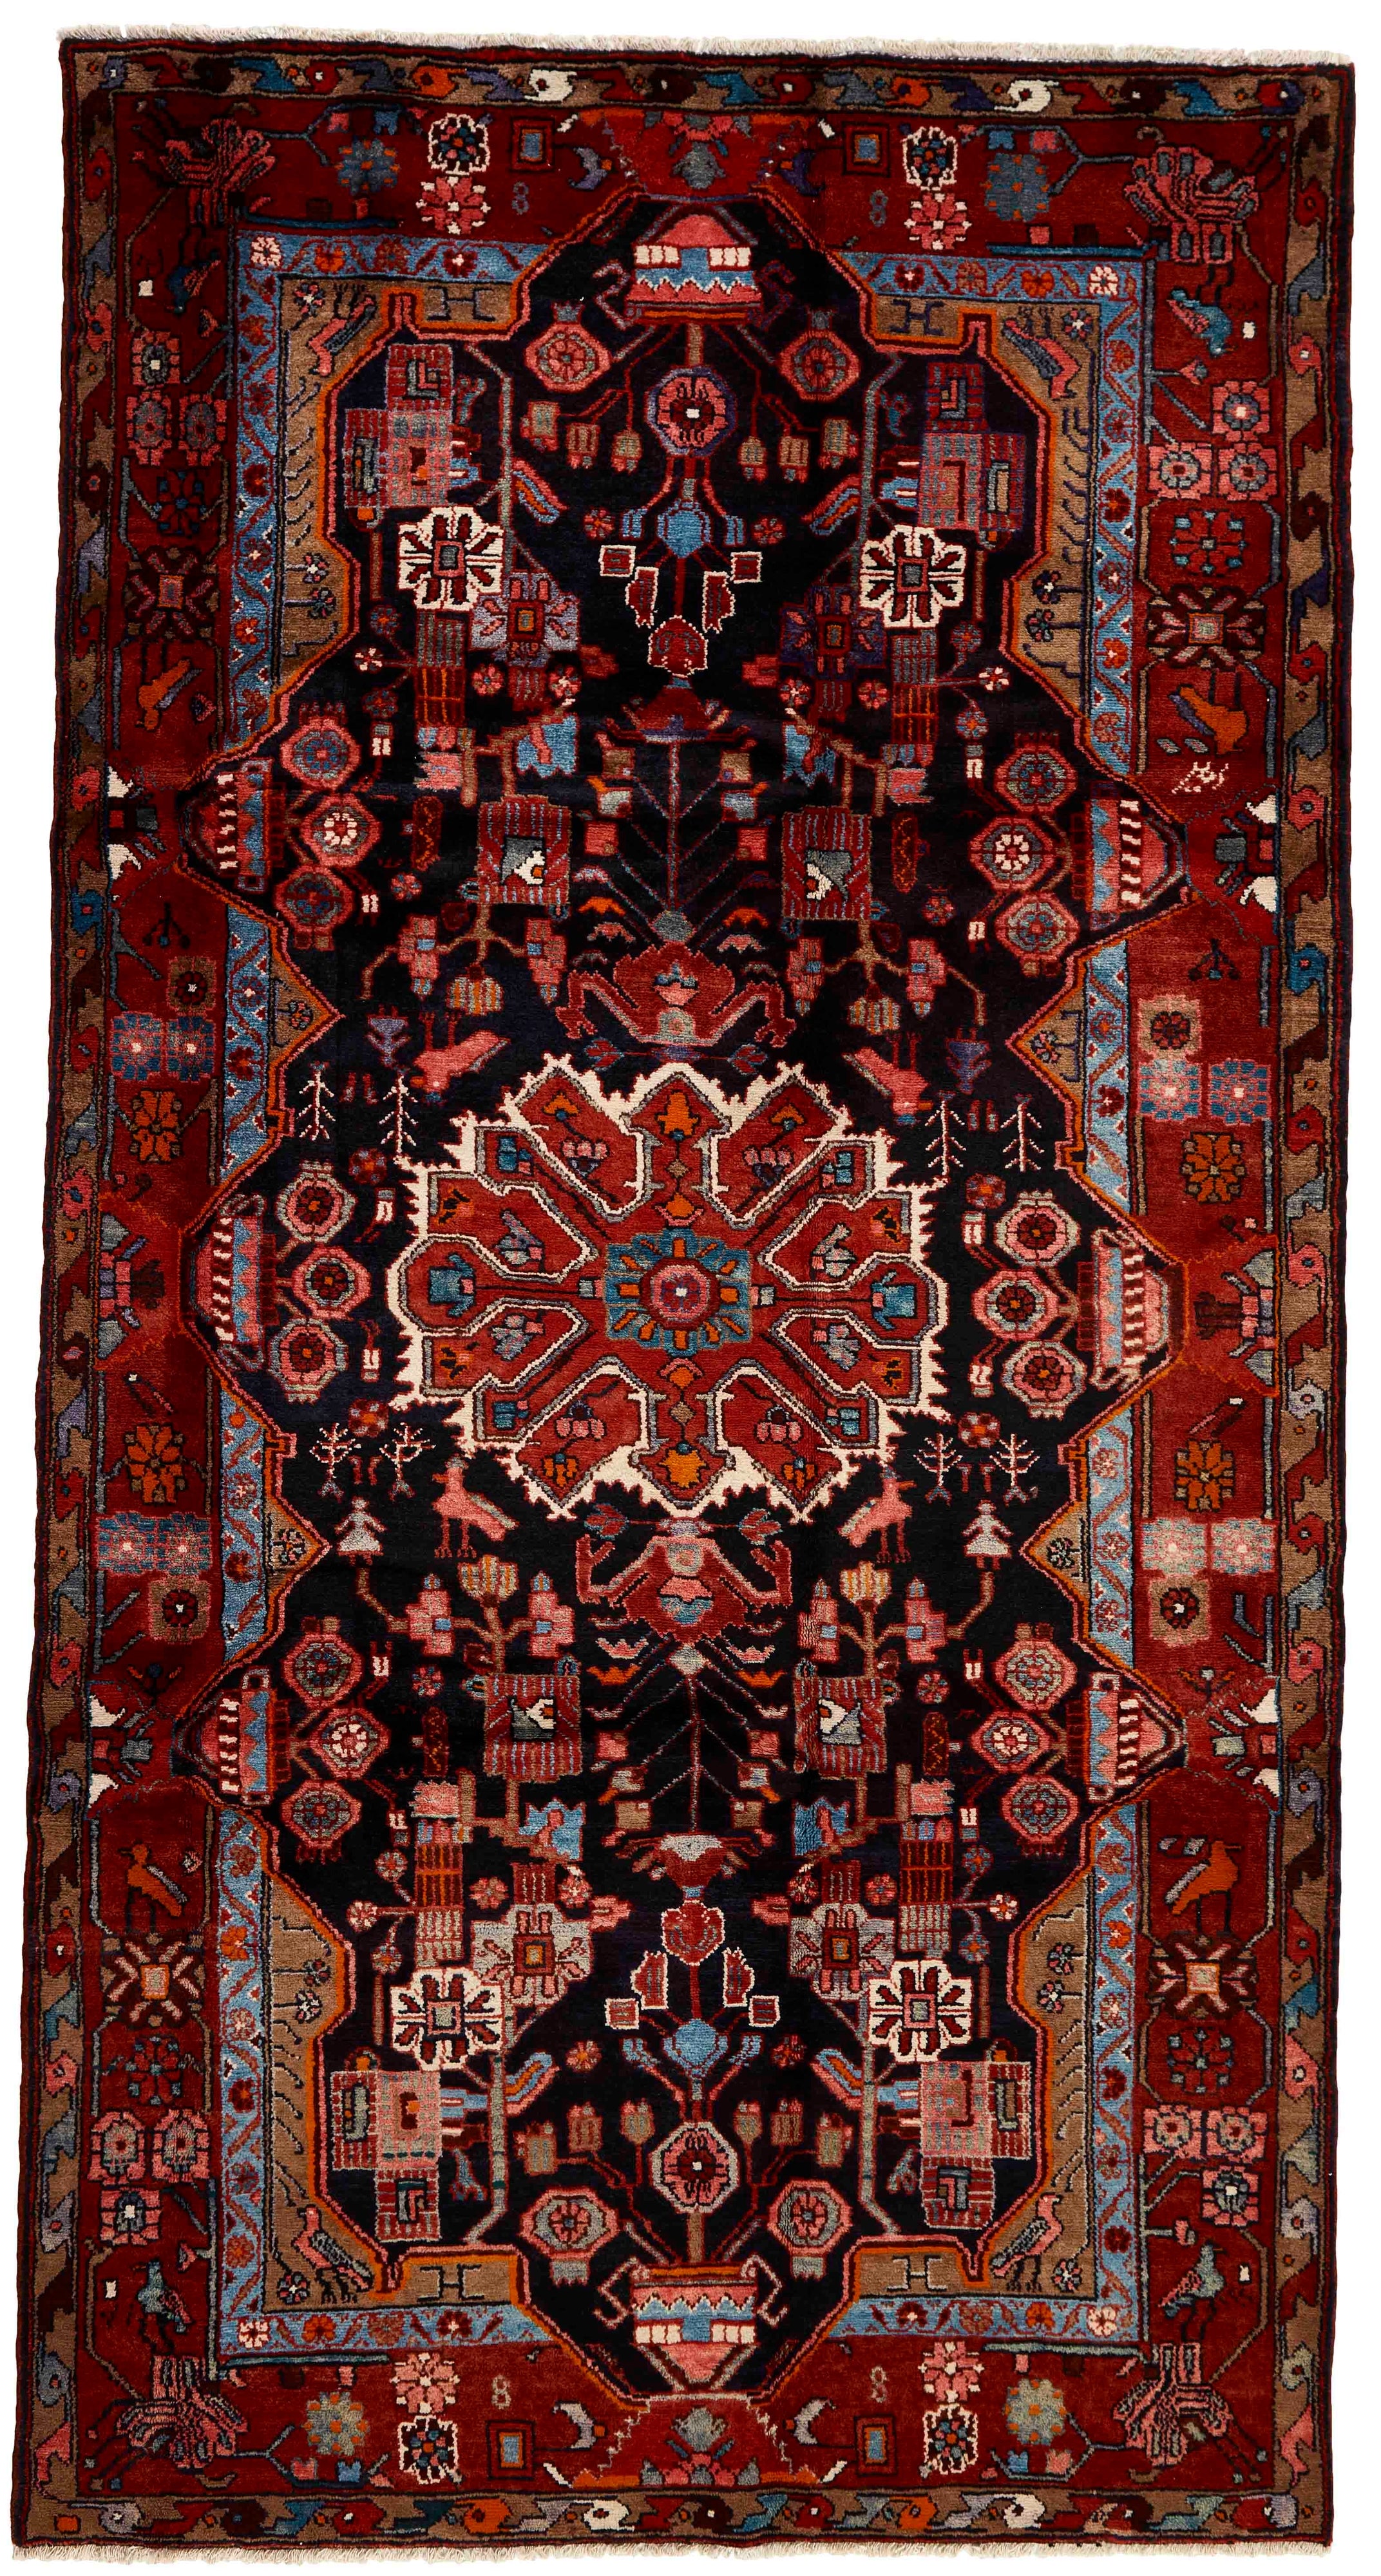 Authentic persian rug with stylised geometric design in red